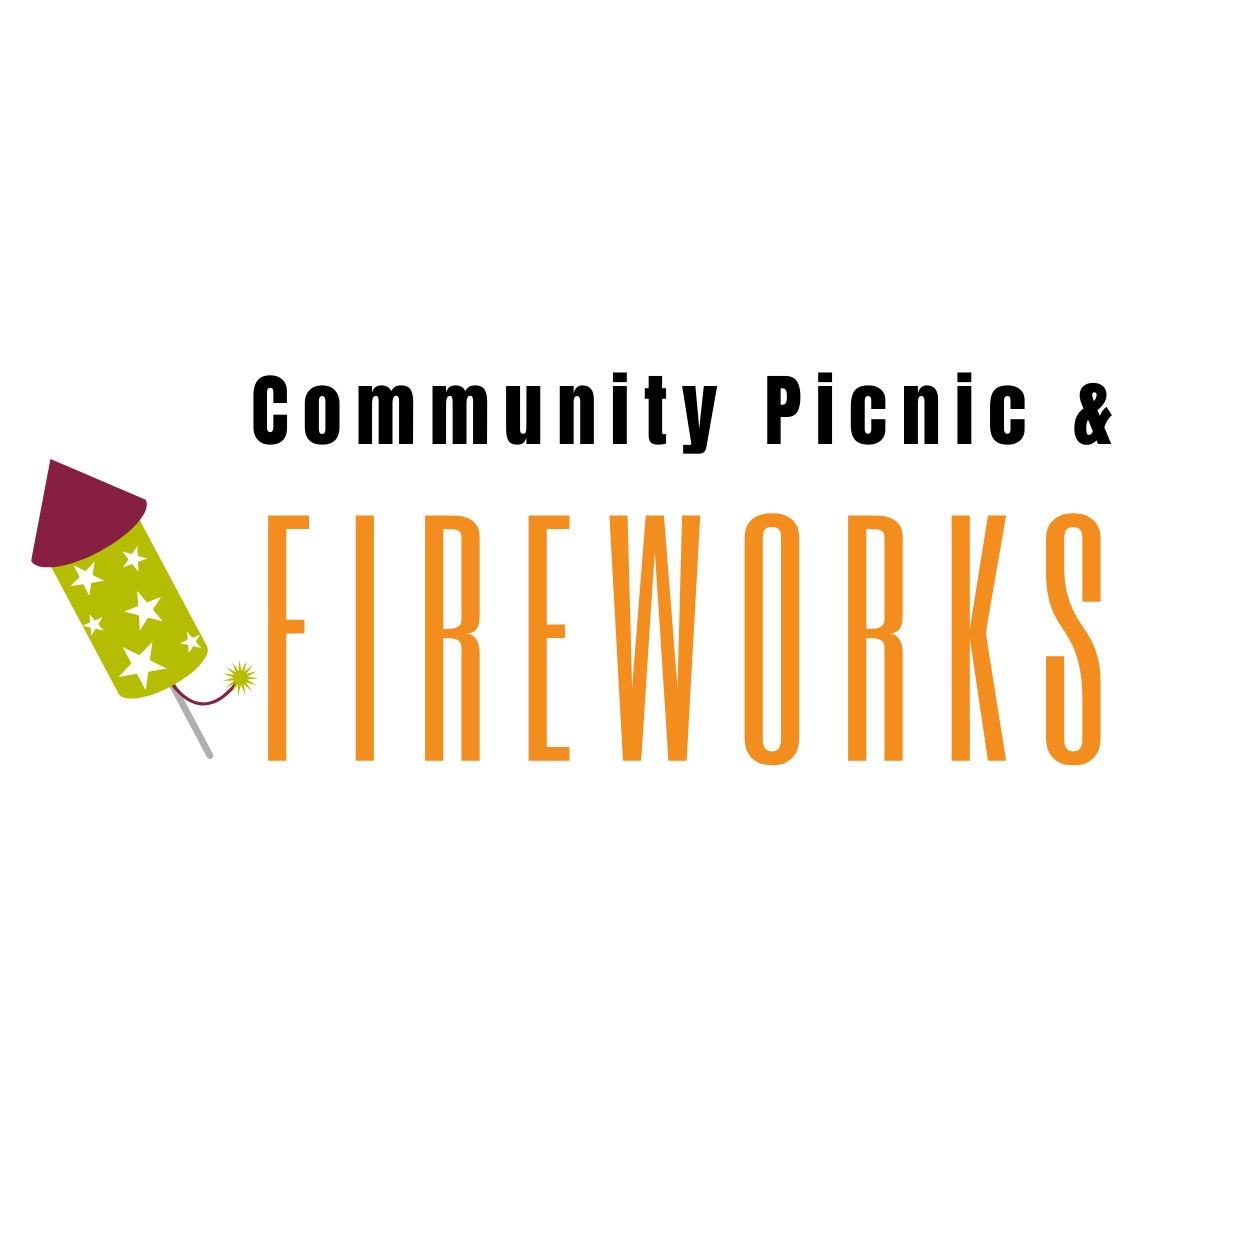 Community Picnic and Fireworks with a magenta and green firecracker